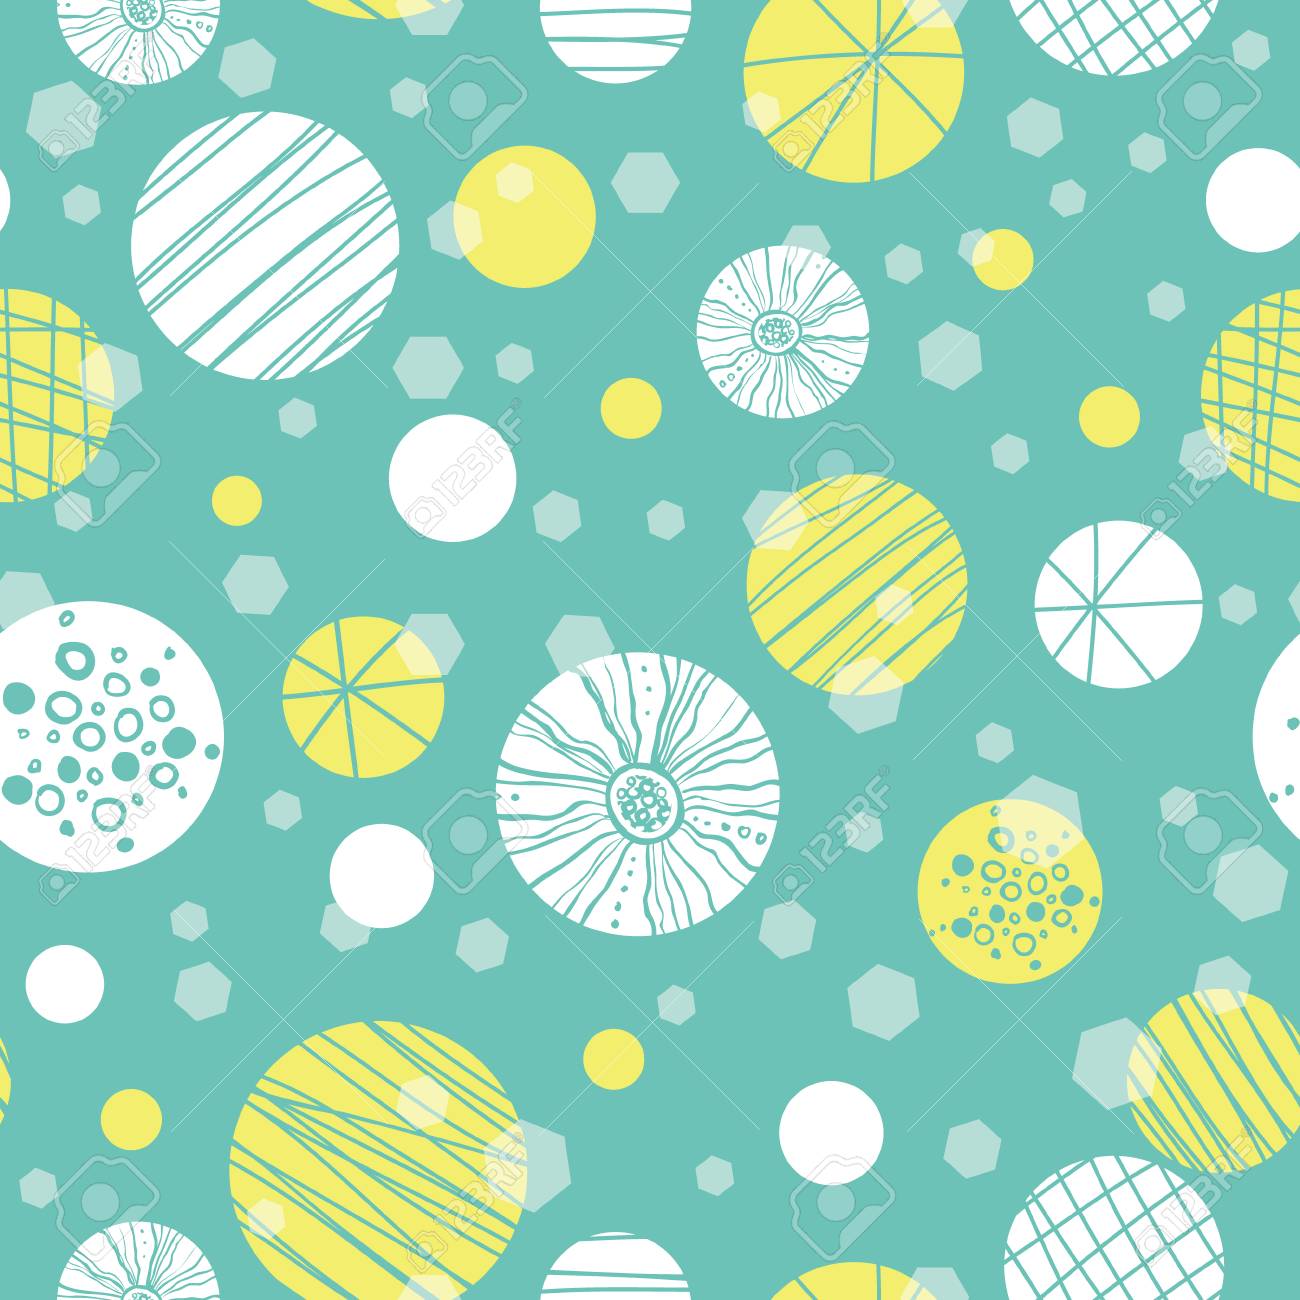 Vector Mint Green Abstract Bubbles Seamless Repeat Pattern